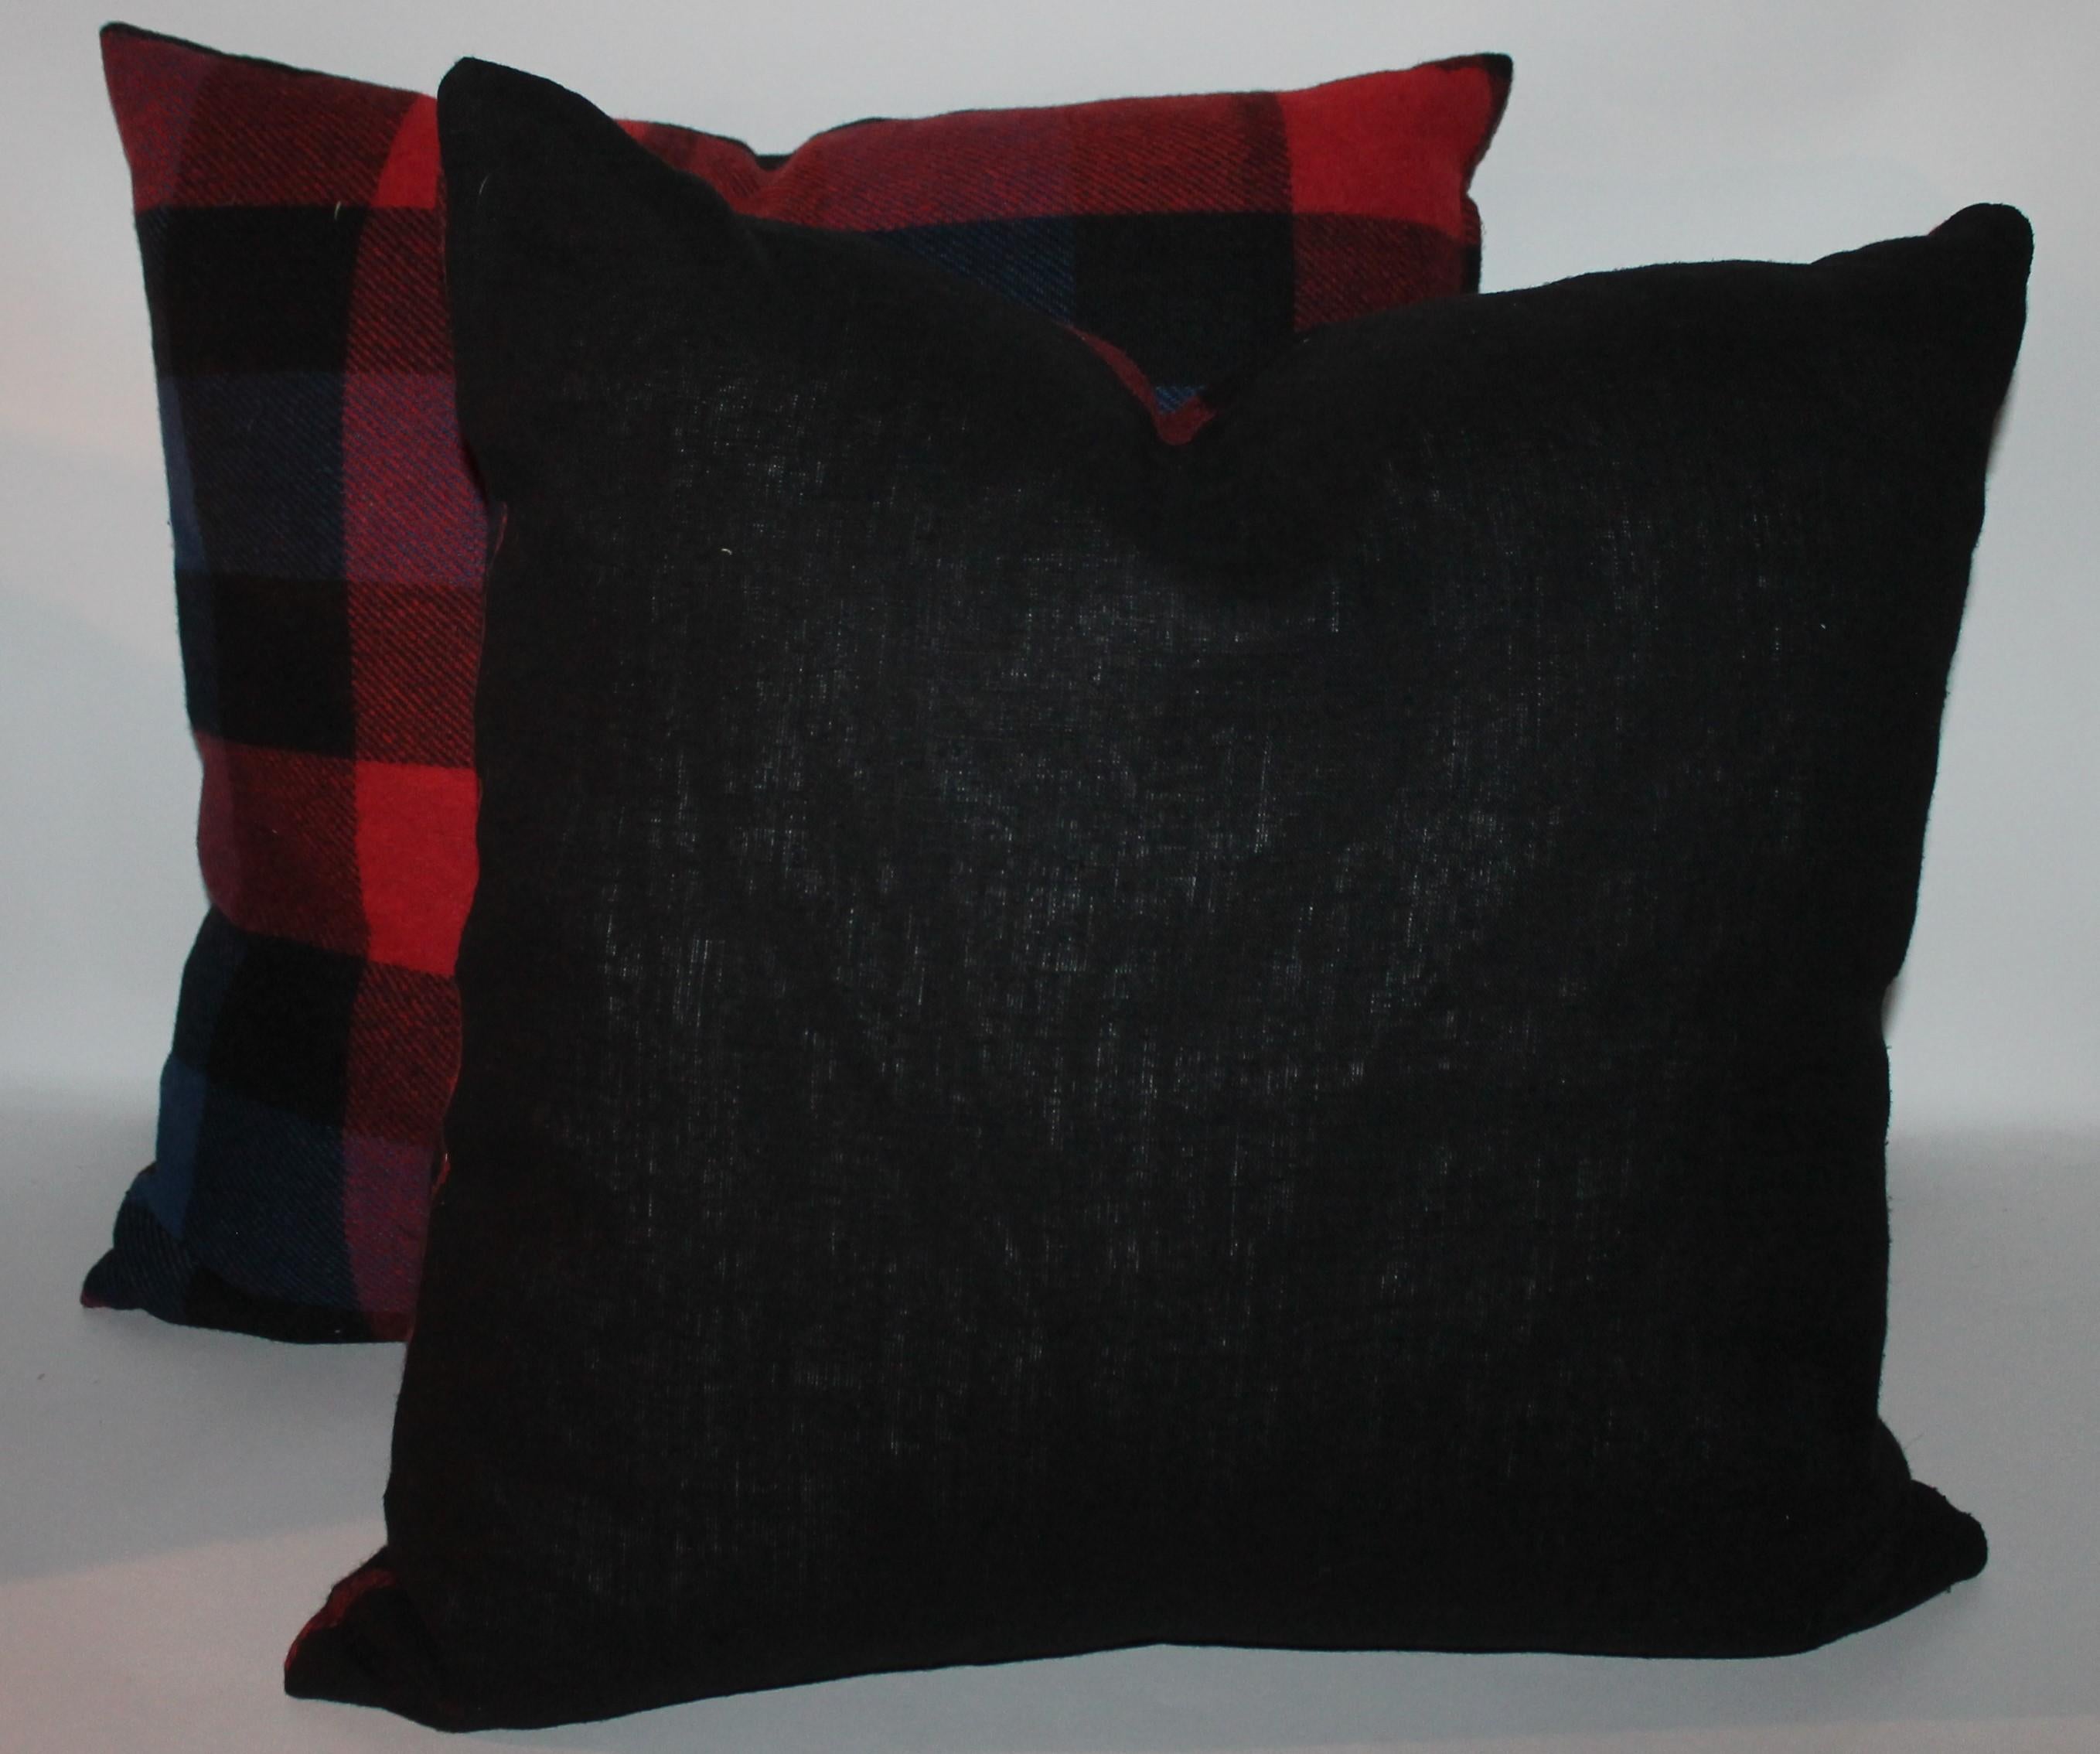 Hand-Crafted Vintage Wool Plaid Blanket Pillows, Pair For Sale